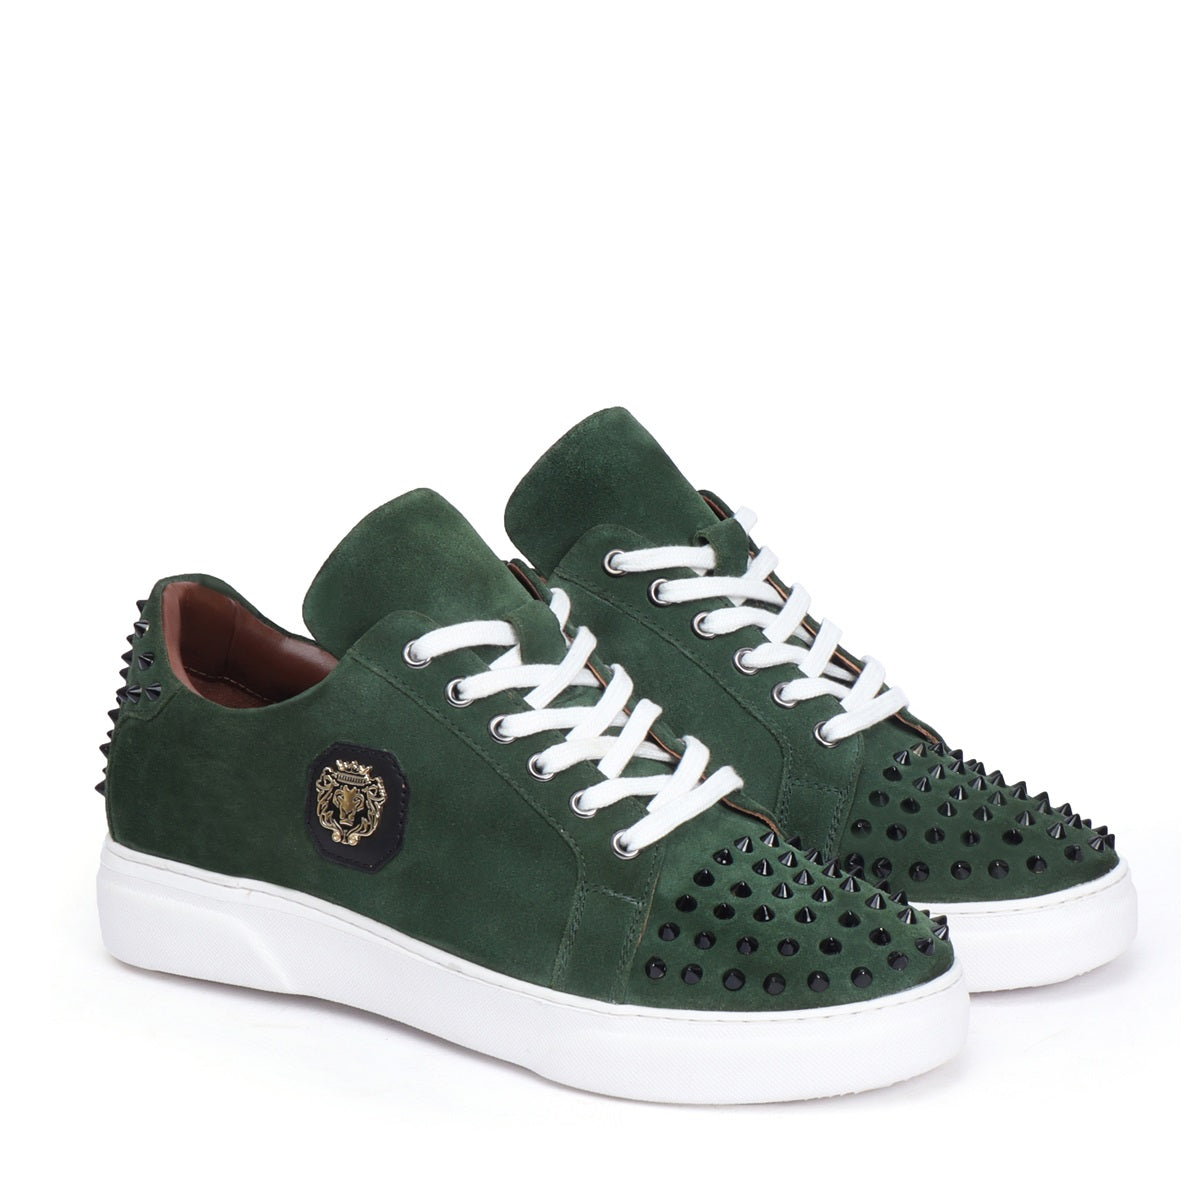 Studded Green Suede Leather Lace-Up Sneakers with Metal Lion logo on Quarter by Brune & Bareskin